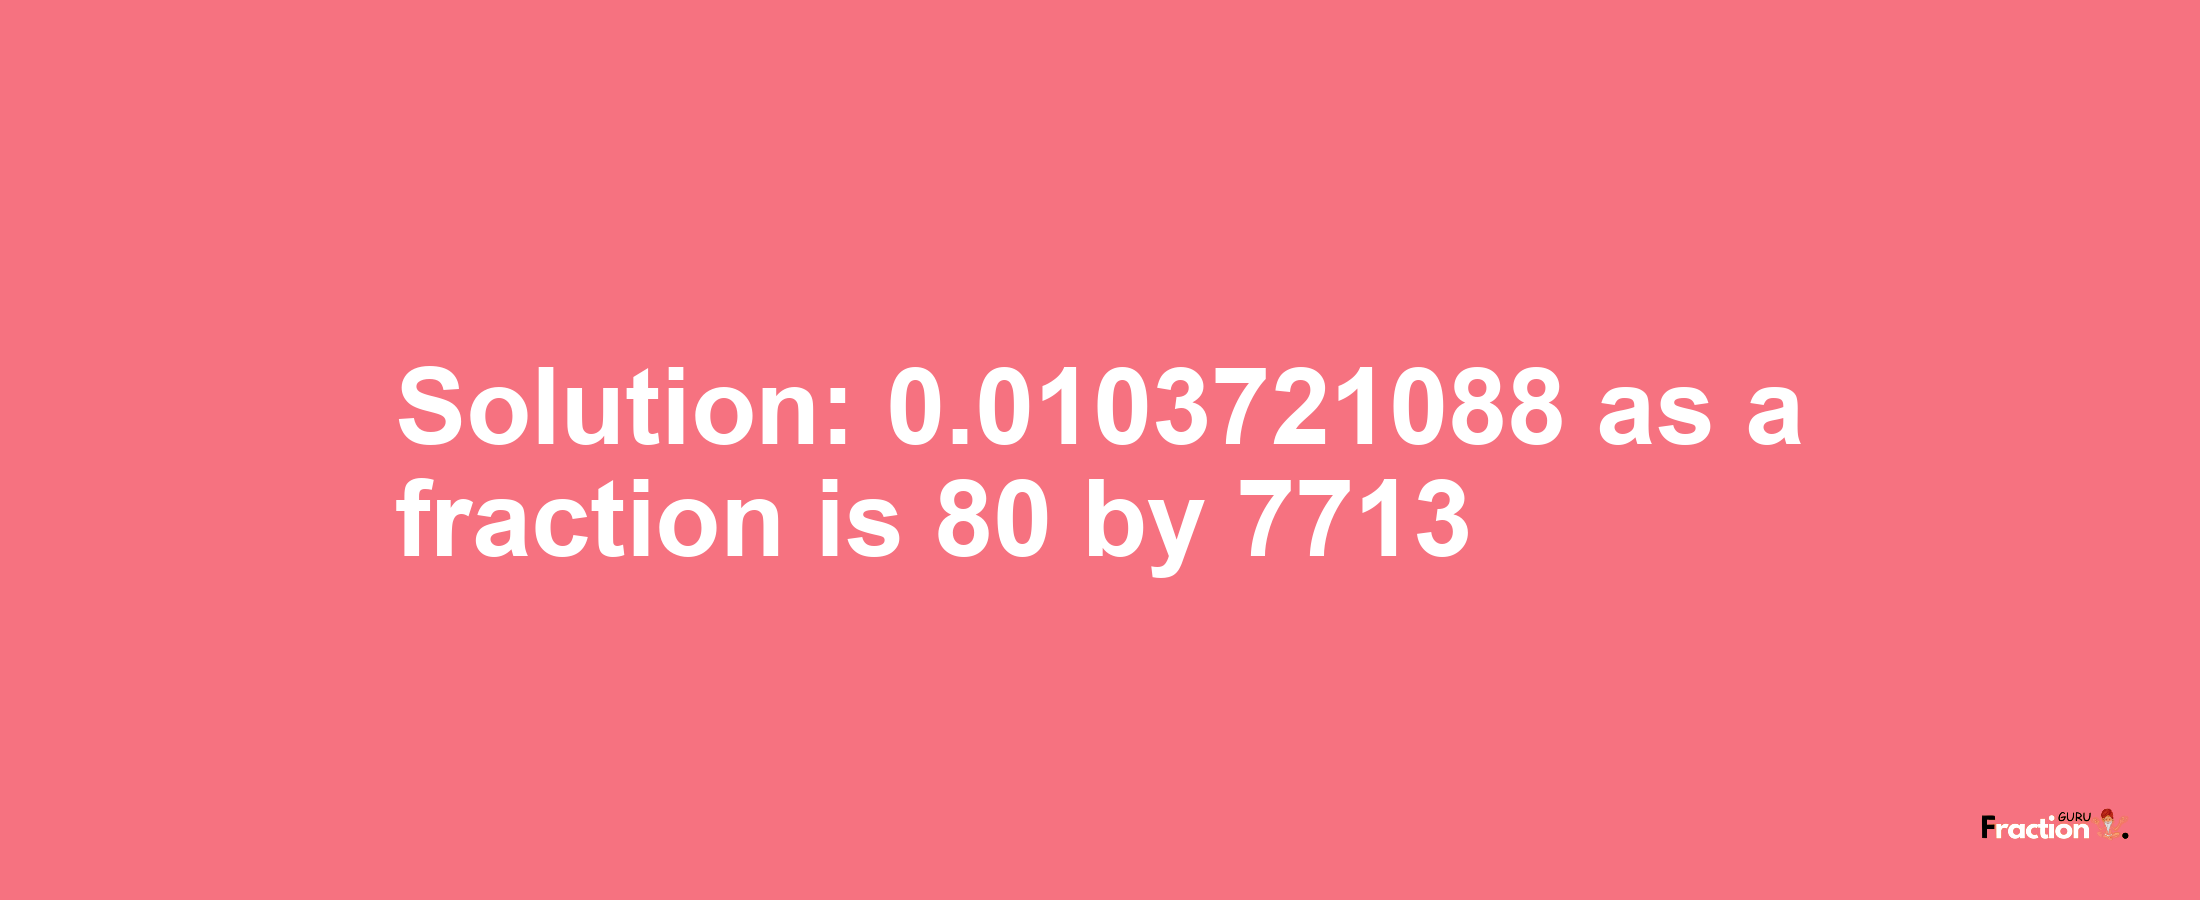 Solution:0.0103721088 as a fraction is 80/7713